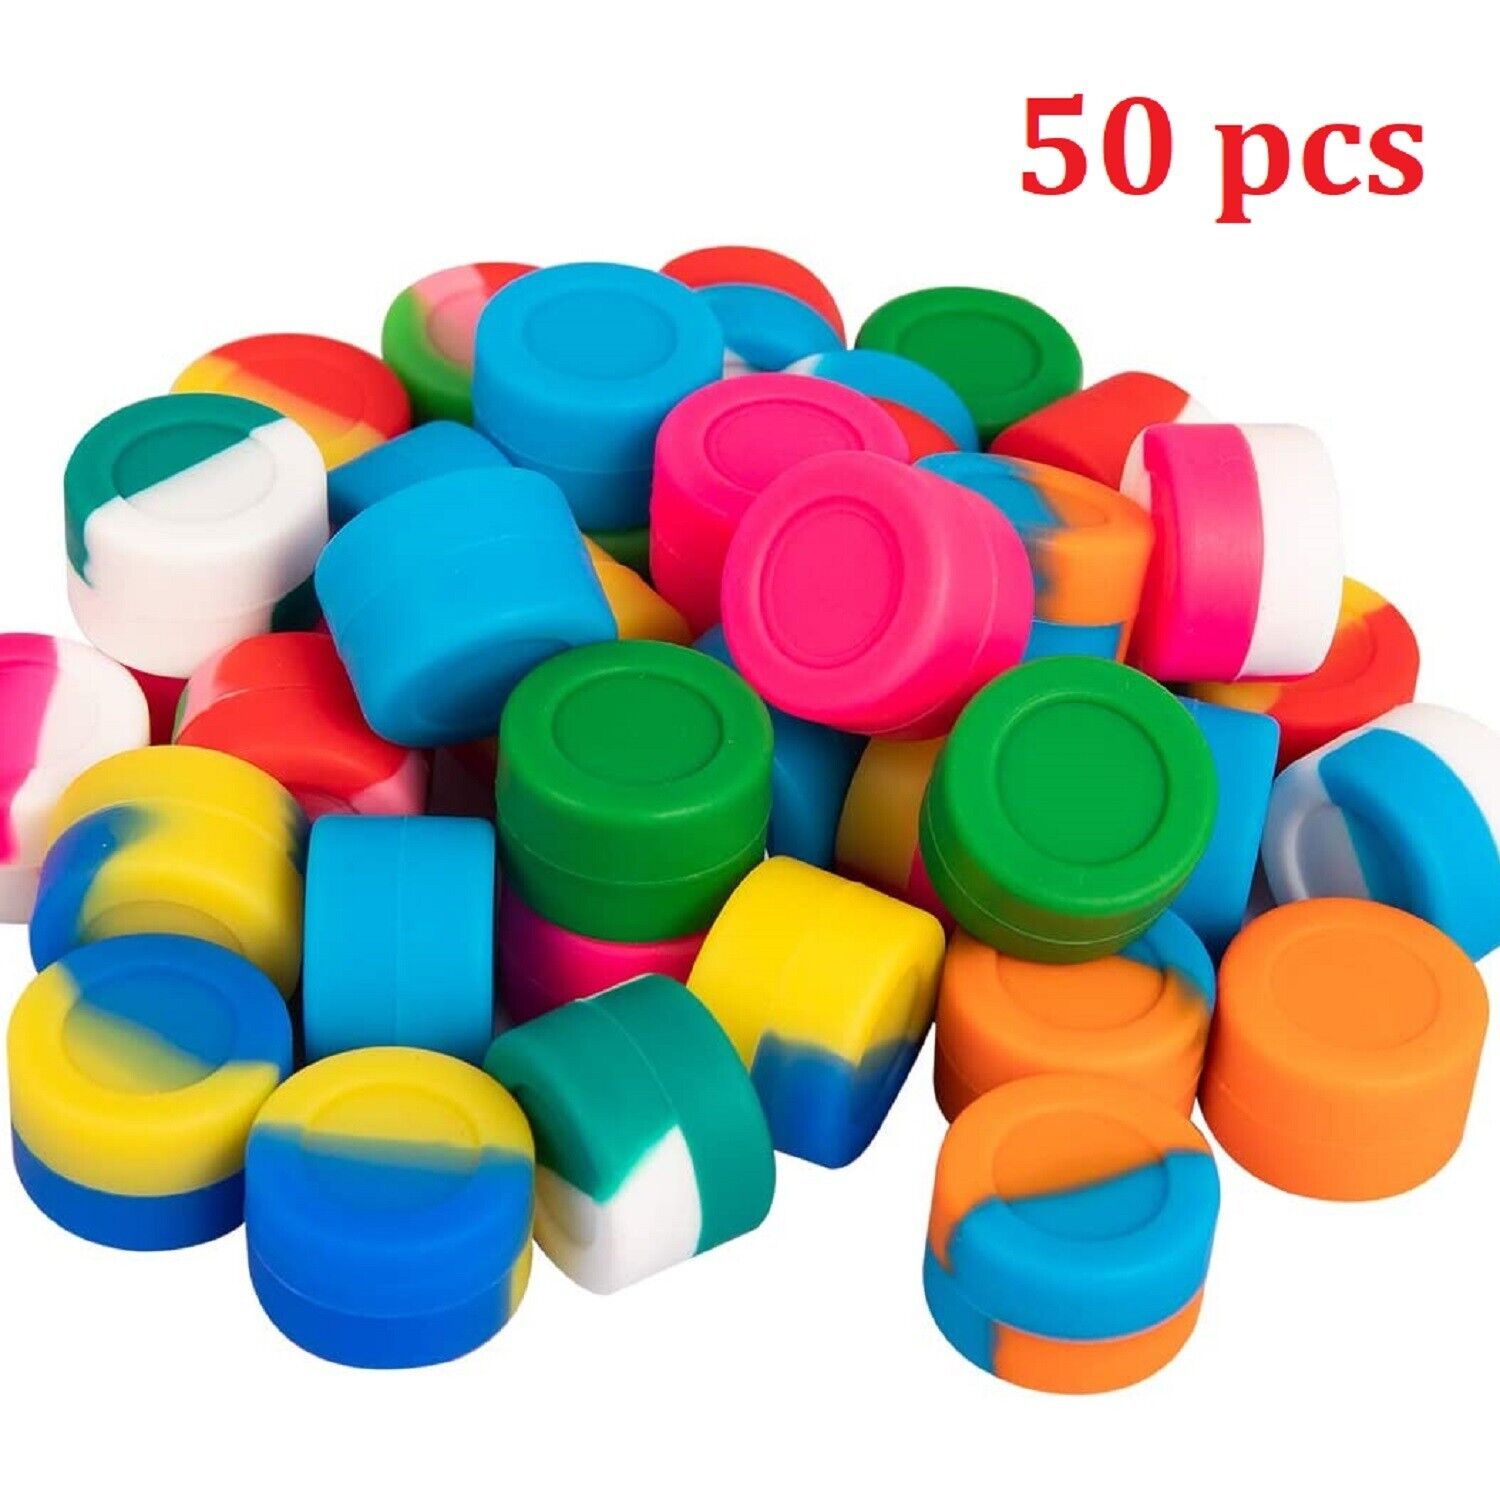 3ml Silicone Container Non-Stick Round Jar Mixed Color Jewelry Case Food Storage